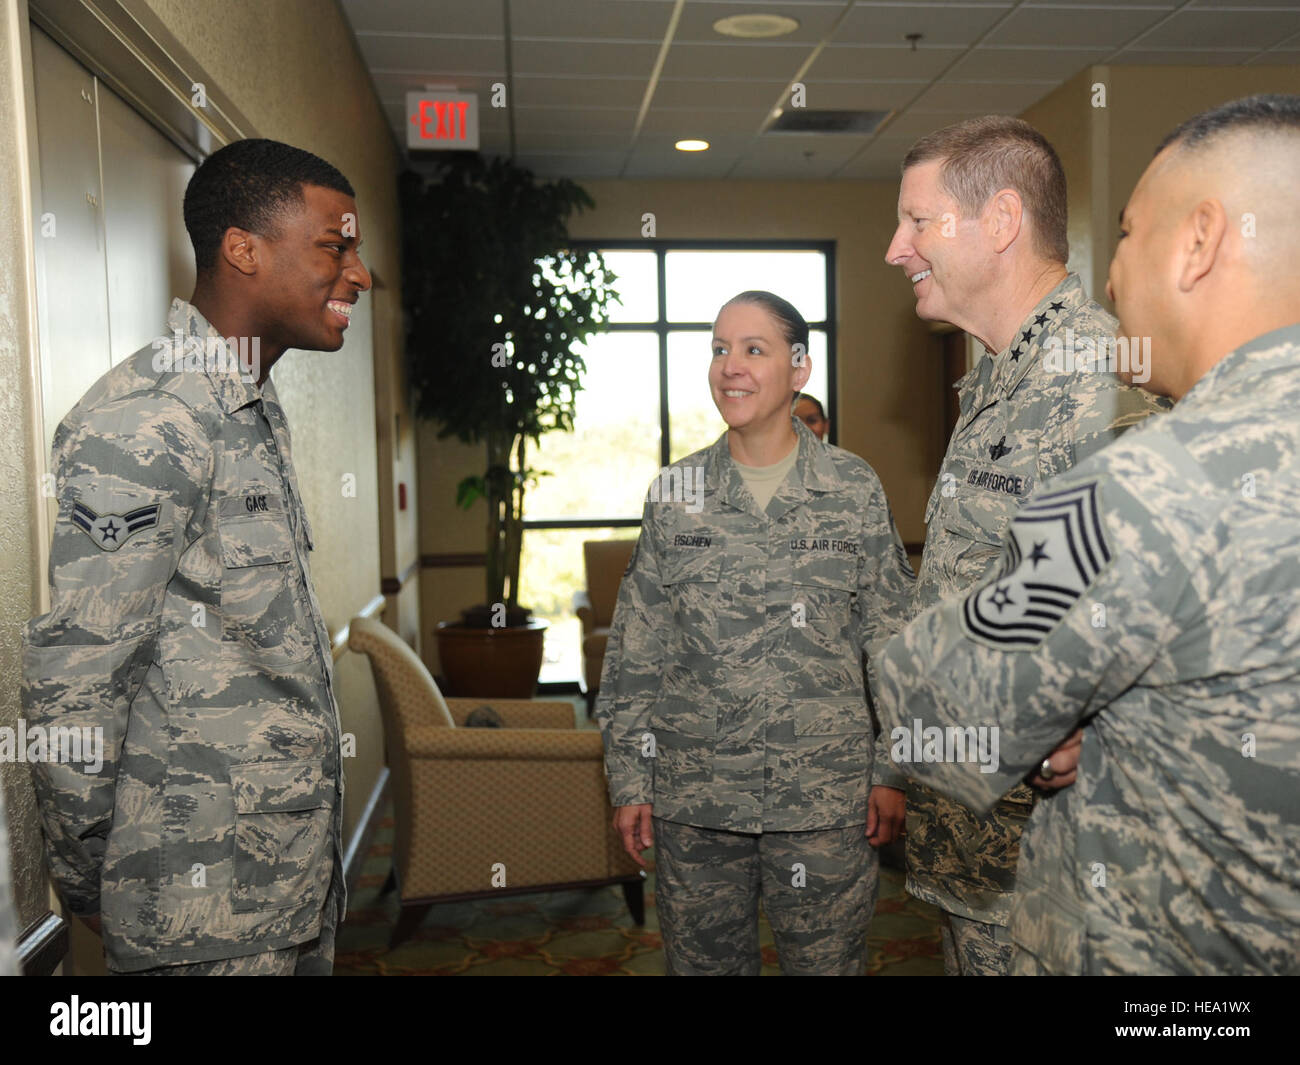 U.S. Air Force Chief Master Sgt. Paula Eischen, center, with the 81st Medical Group, introduces Airman 1st Class Cory Gage, left, with the 81st Diagnostic and Therapeutics Squadron, to Gen. Robin Rand, second from right, the commander of Air Education and Training Command (AETC), and Chief Master Sgt. Gerardo Tapia, the command chief of AETC, at the Bay Breeze Event Center at Keesler Air Force Base, Miss, Nov. 14, 2013.  Kemberly Groue Stock Photo